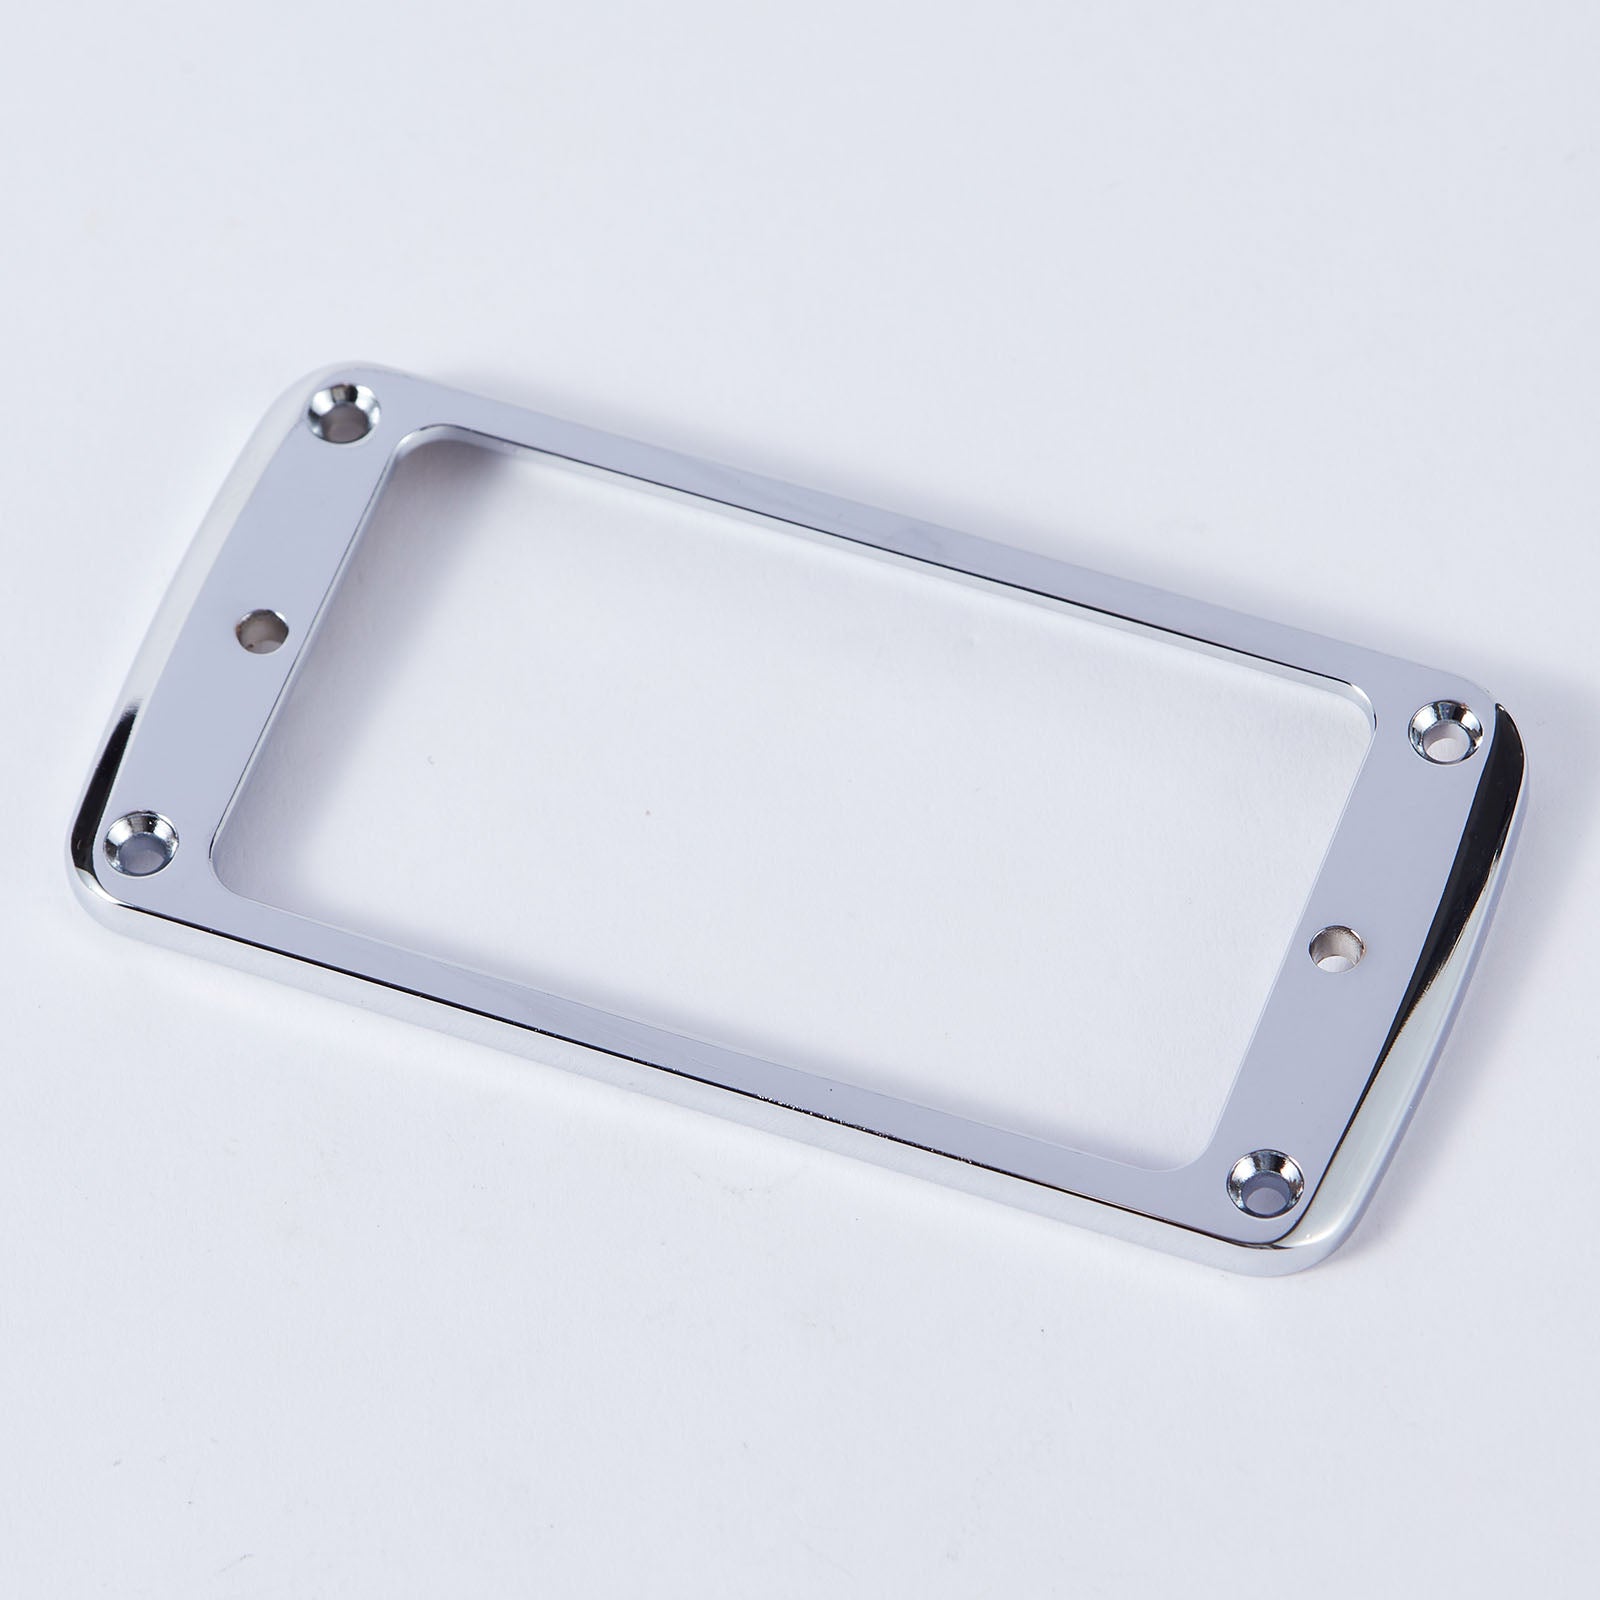 A durable and versatile pickup frame designed to accommodate different electric guitar models.